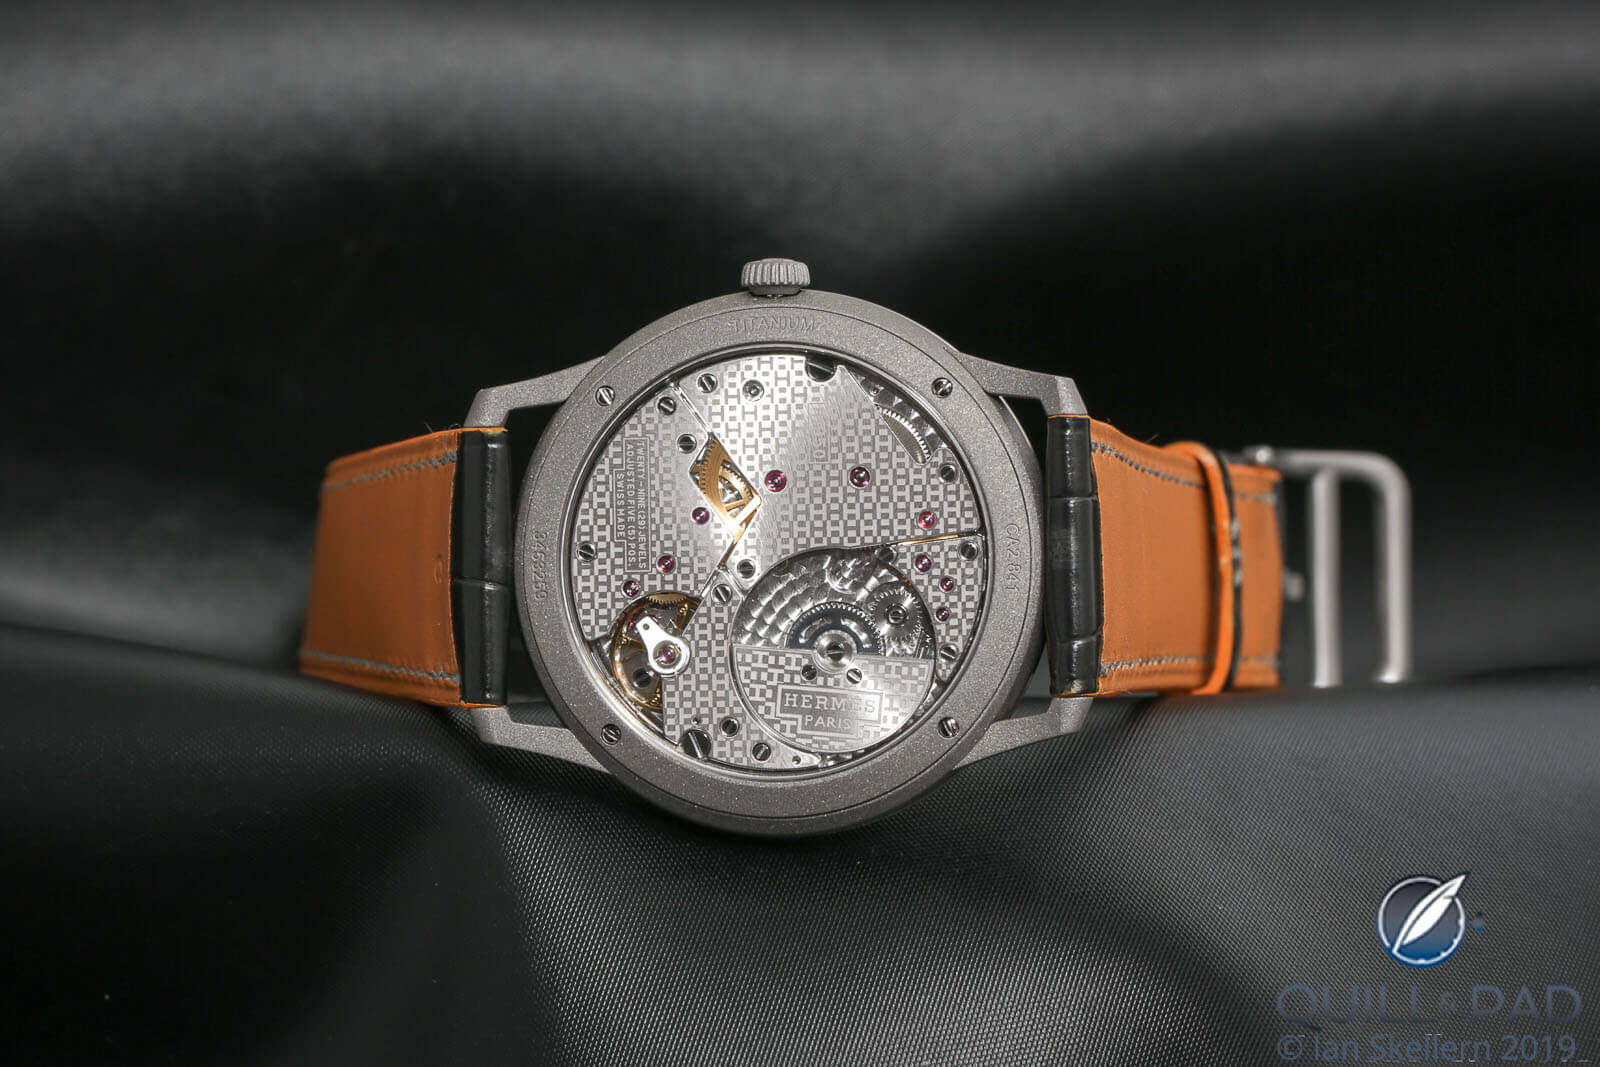 View through the display back to the miniature-H-patterned micro-rotor manufacture movement of the Slim D’Hermès Titane